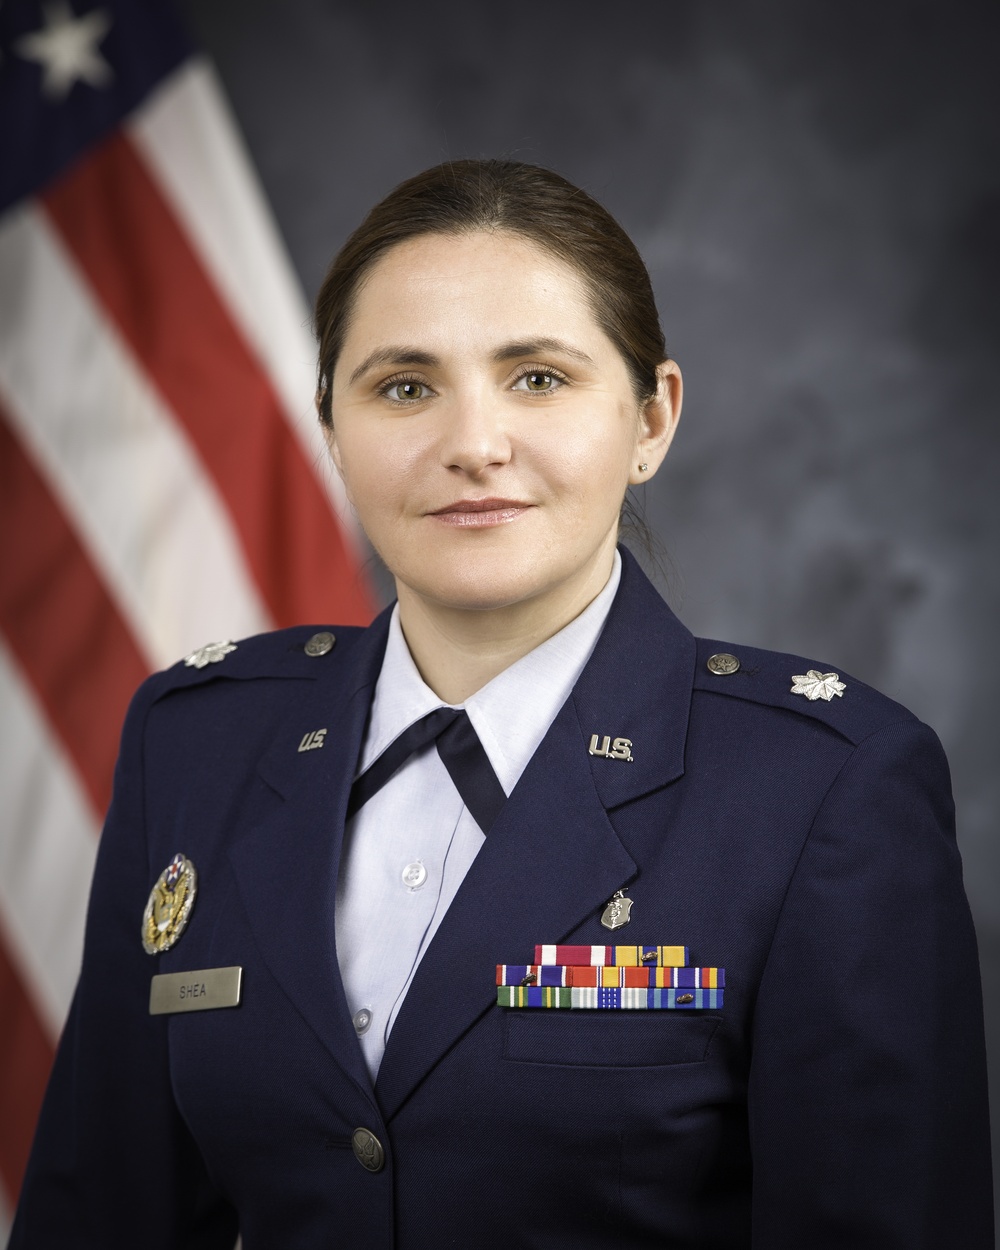 Official portrait, Lt. Col. Kyra Y. Shea, US Air Force